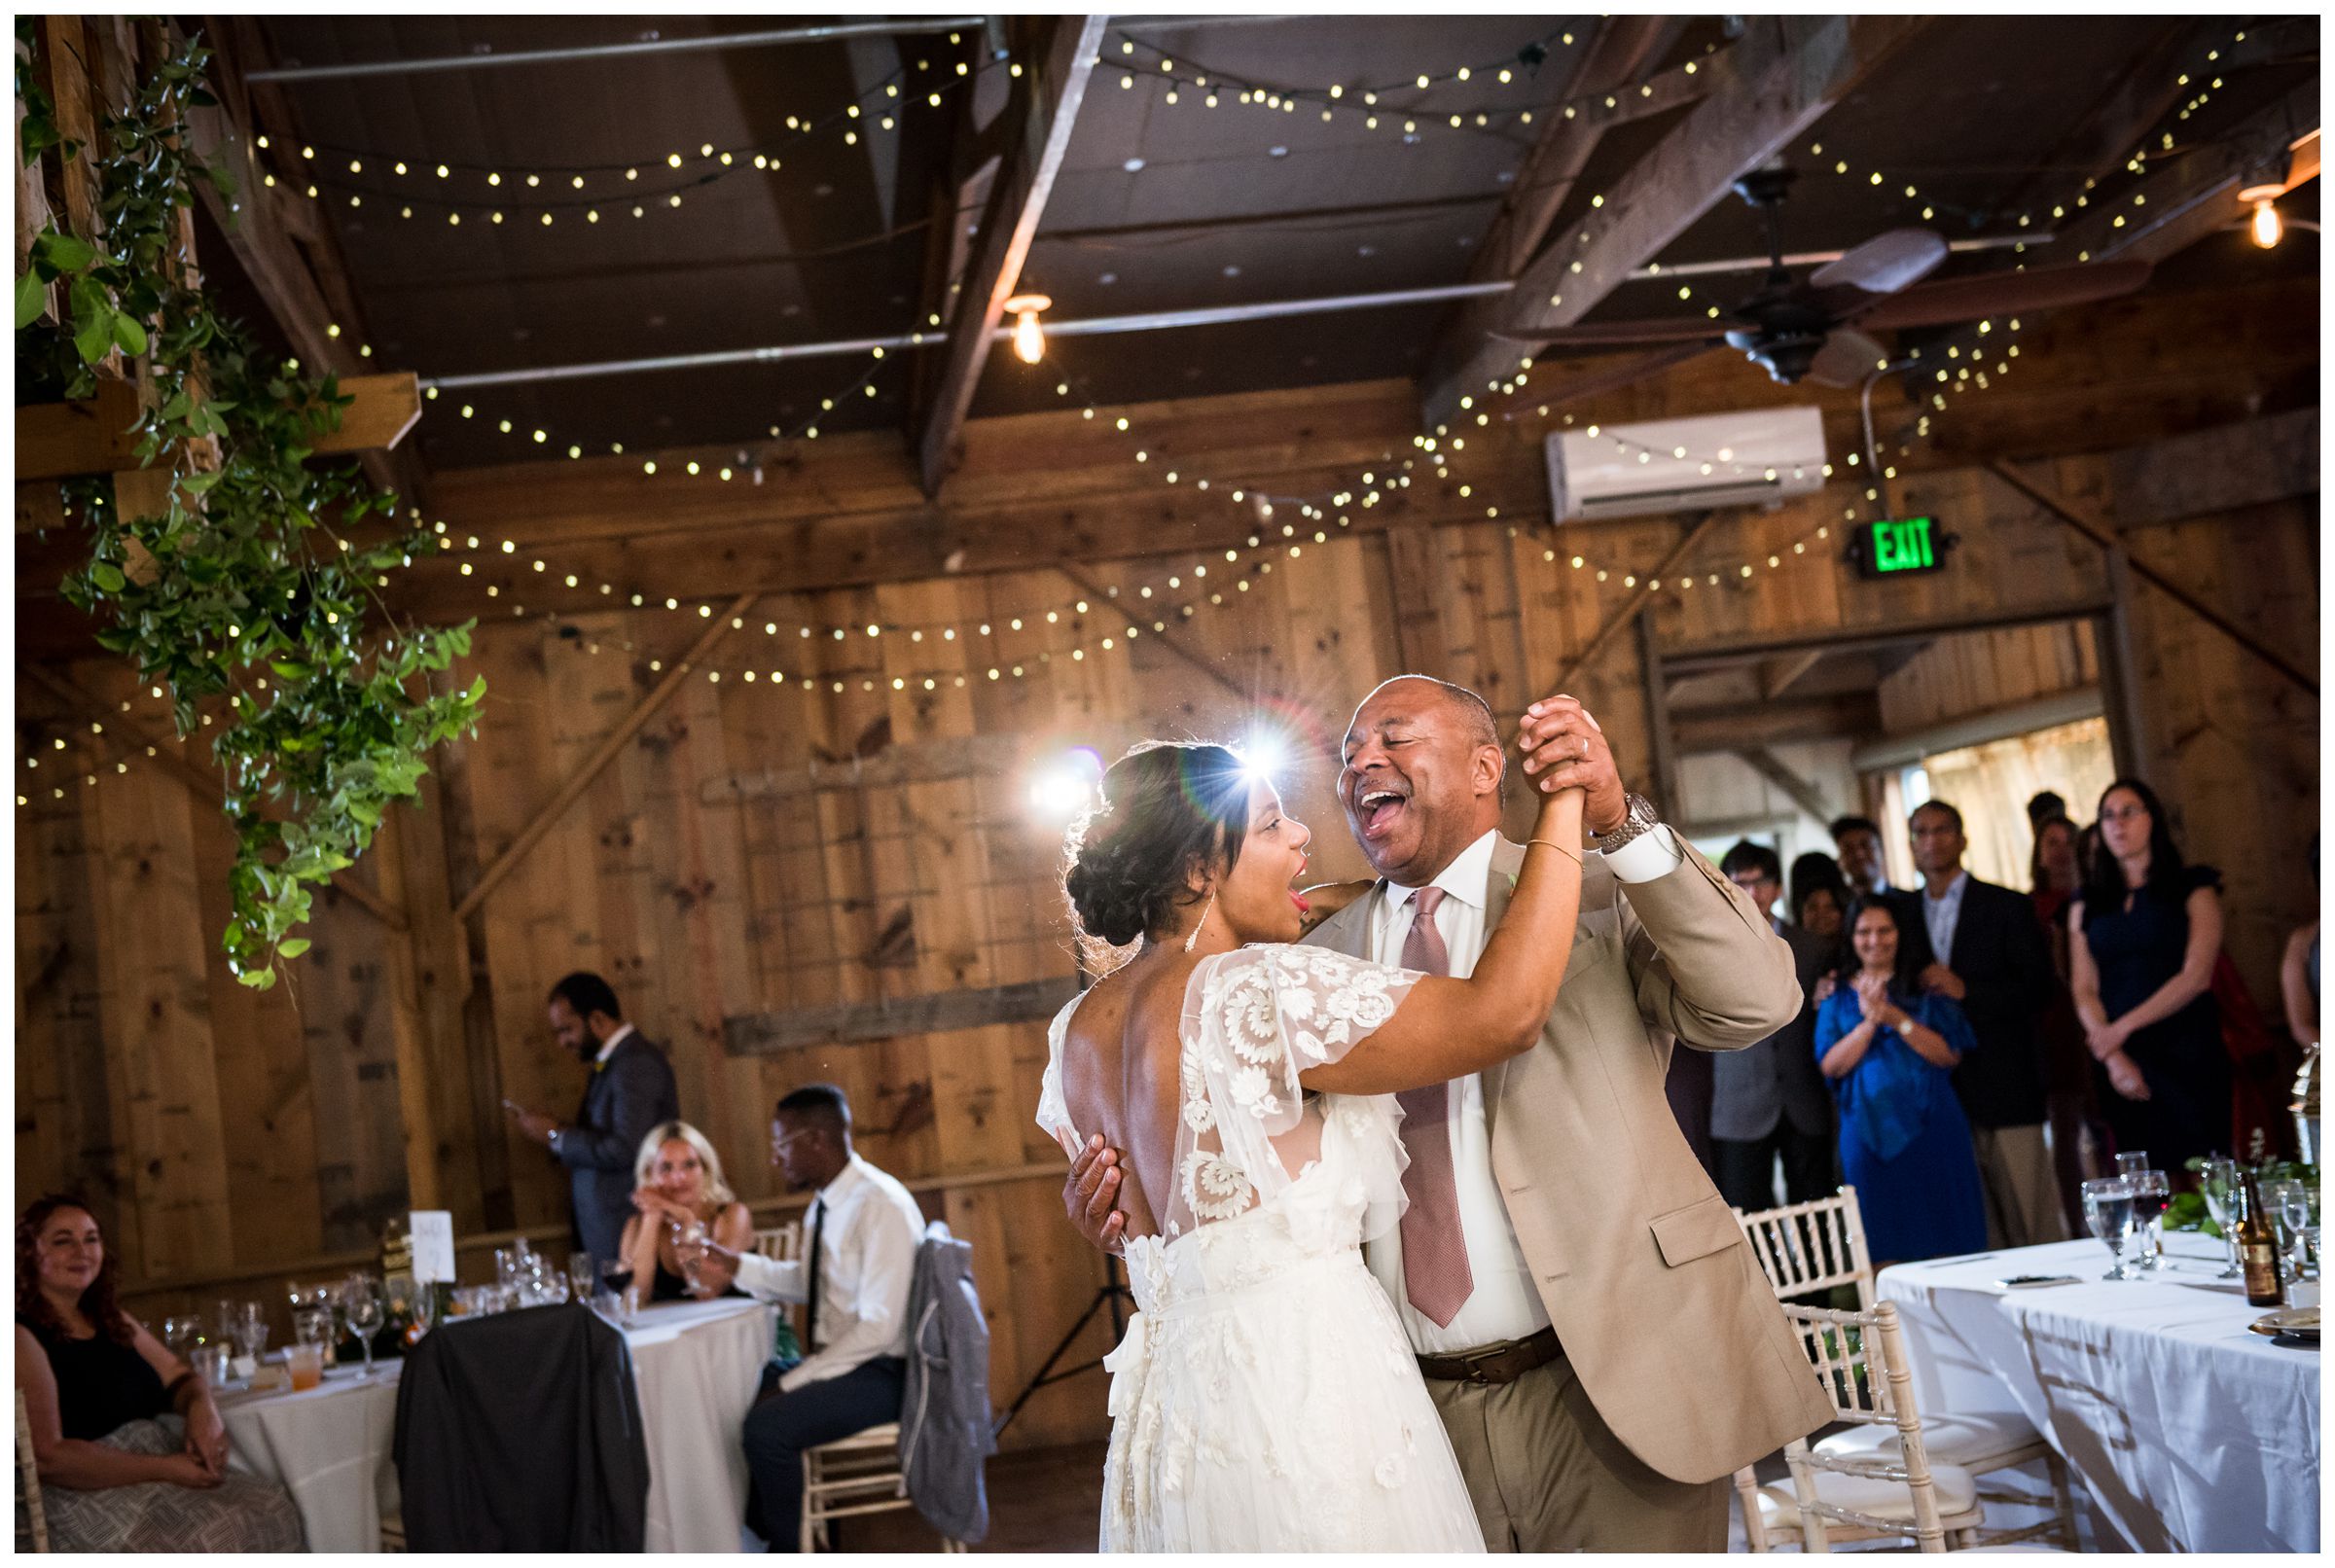 father daughter dance during rustic wedding reception at historic barn